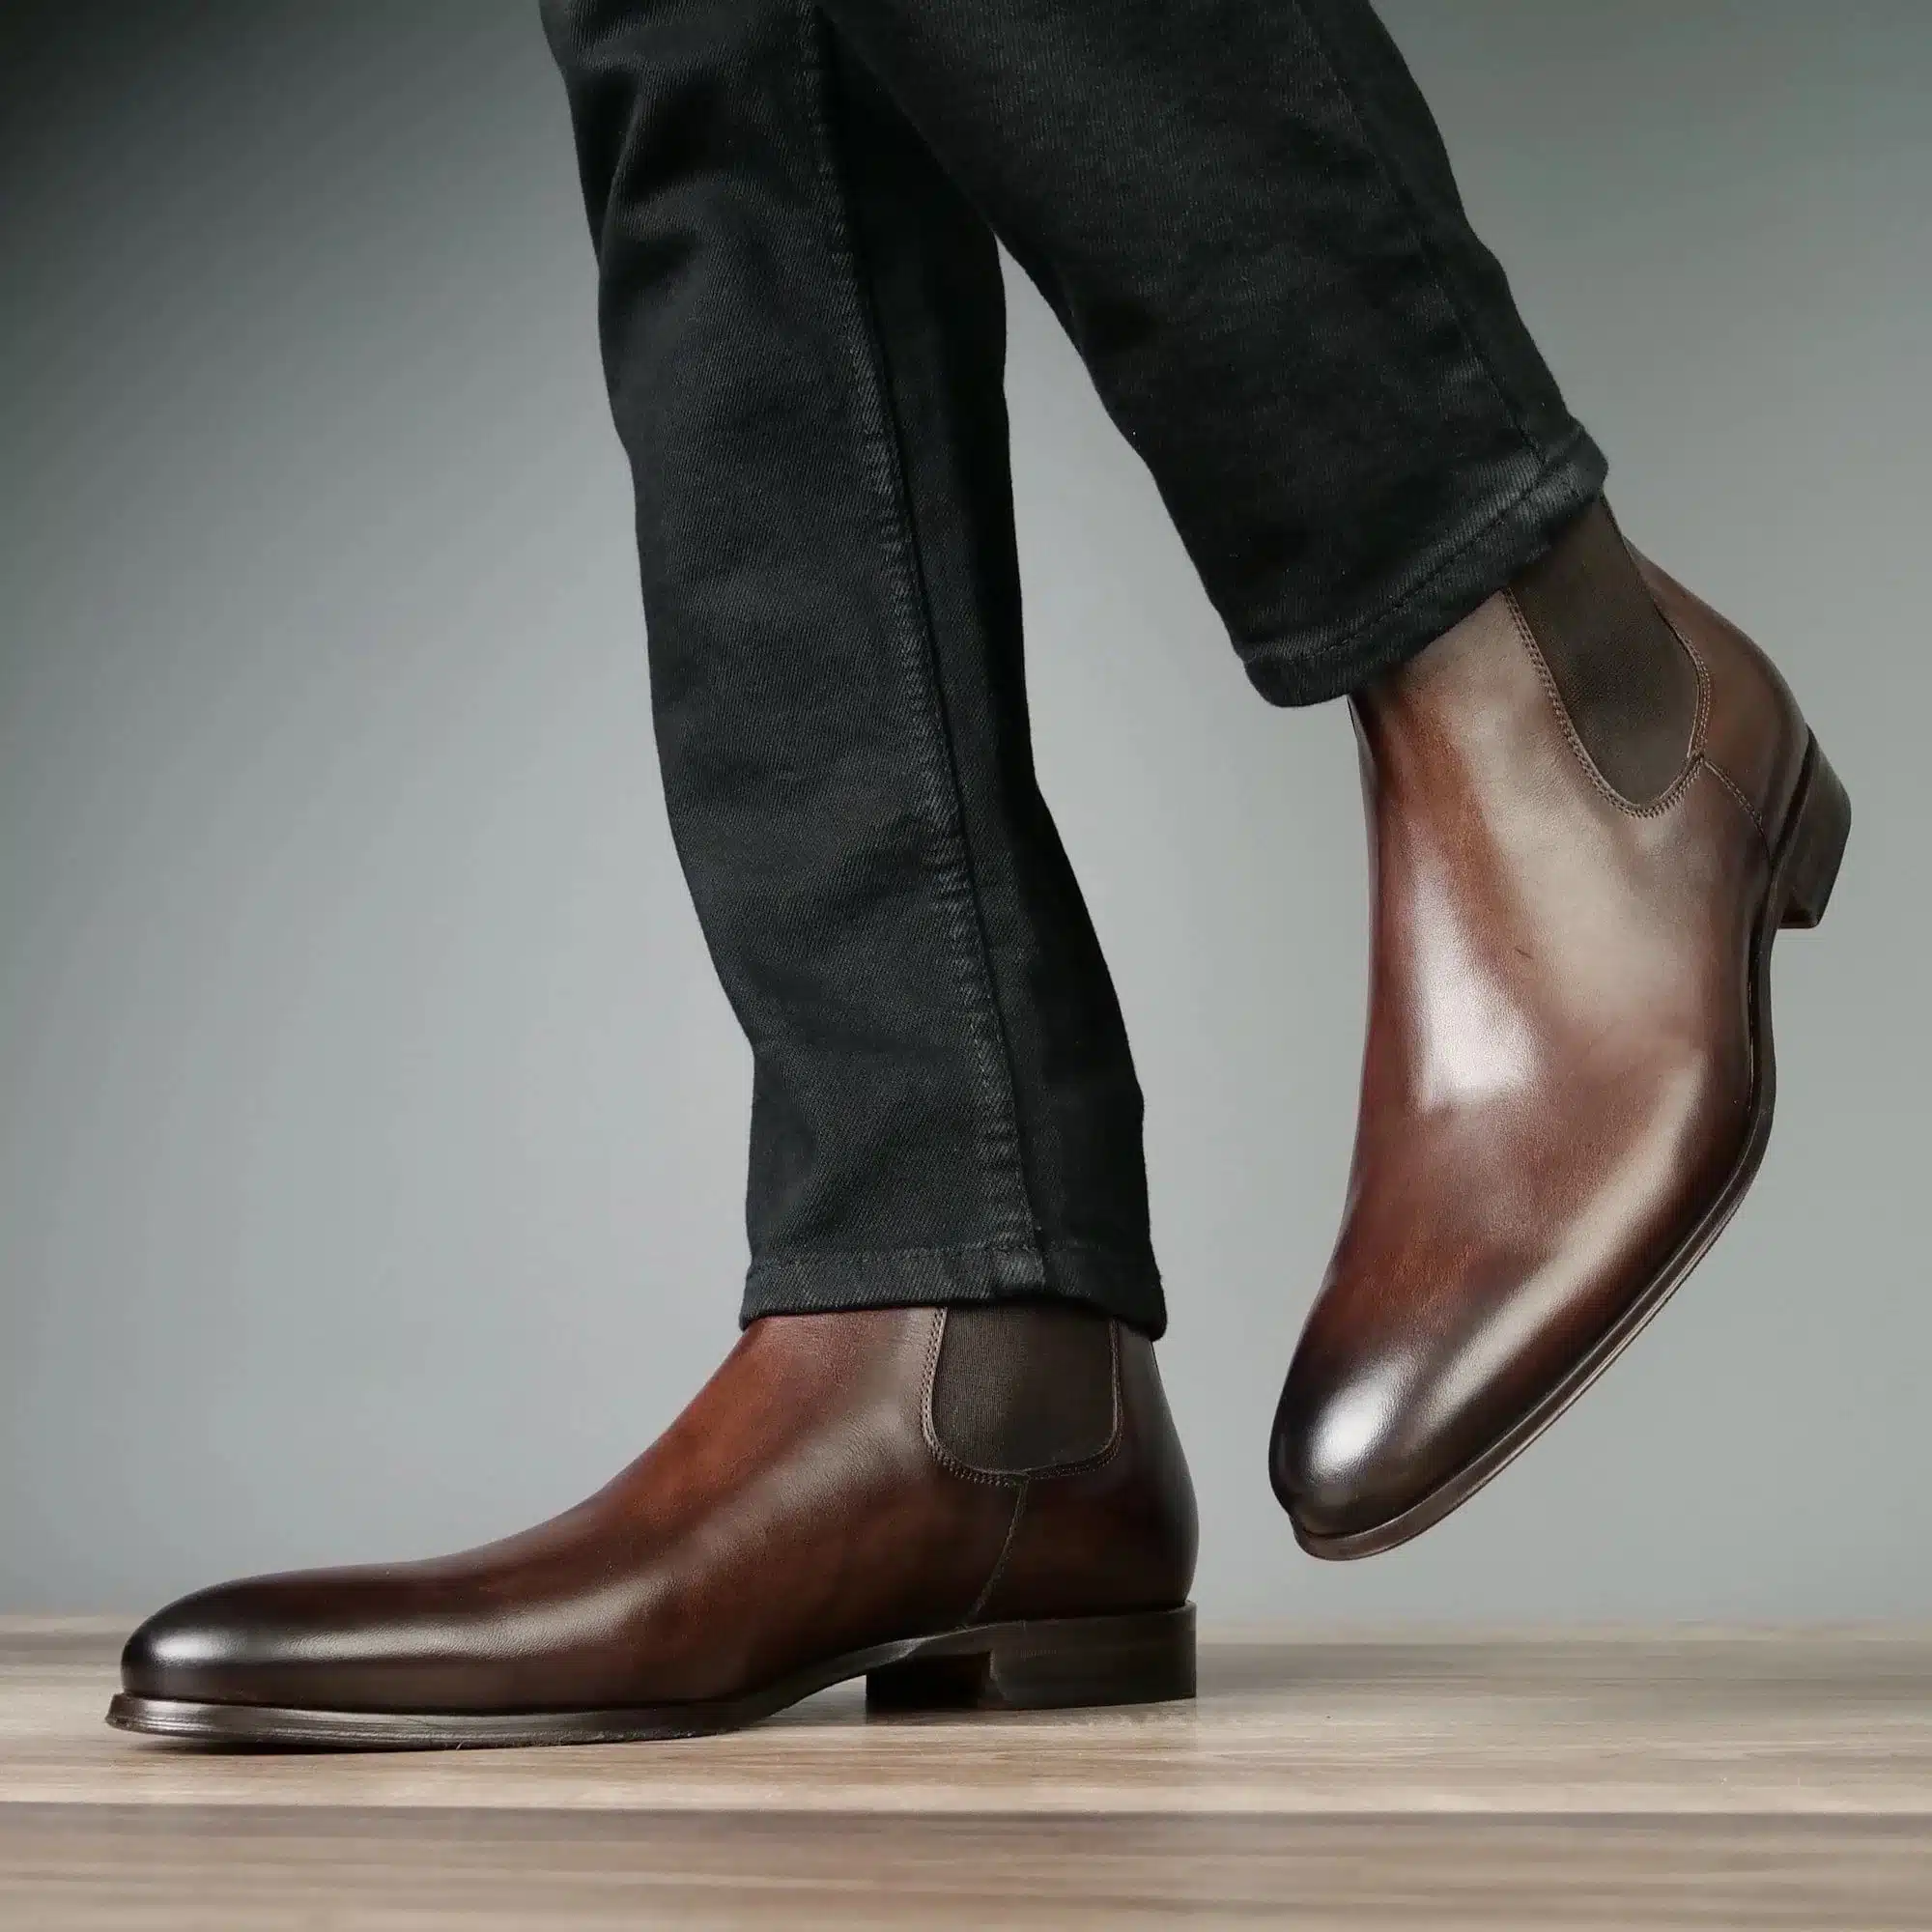 https://www.themodestman.com/wp-content/uploads/2023/12/Can-You-Wear-Brown-Shoes-With-Black-Pants.jpg